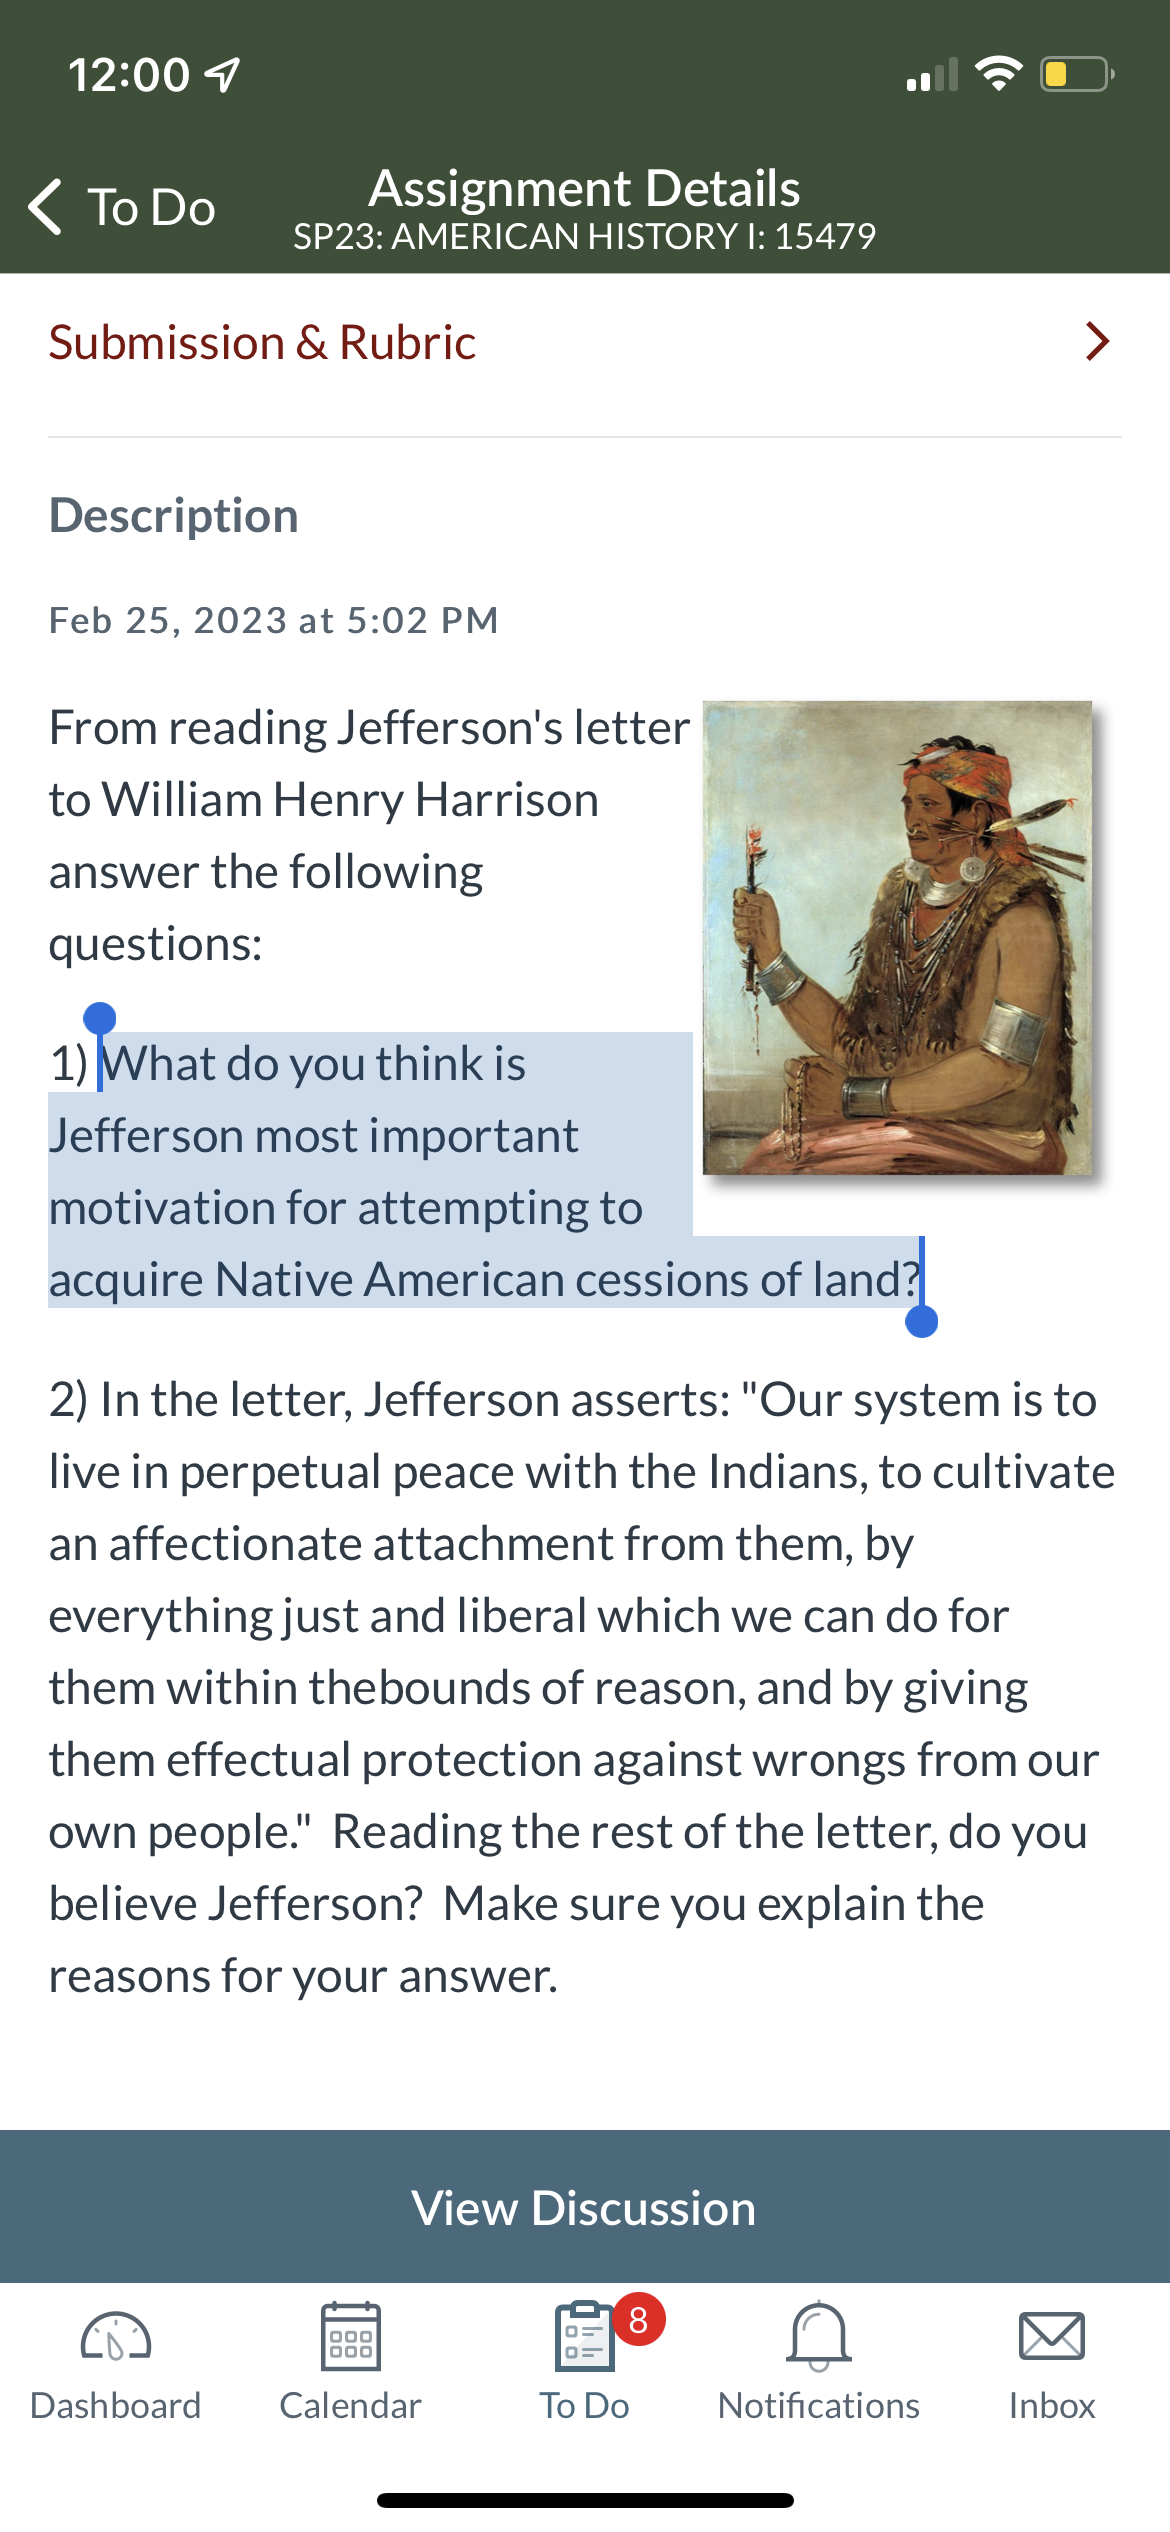 12:00
< To Do
Assignment Details
SP23: AMERICAN HISTORY I: 15479
Submission & Rubric
Description
Feb 25, 2023 at 5:02 PM
From reading Jefferson's letter
to William Henry Harrison
answer the following
questions:
1) What do you think is
Jefferson most important
motivation for attempting to
acquire Native American cessions of land?
View Discussion
2) In the letter, Jefferson asserts: "Our system is to
live in perpetual peace with the Indians, to cultivate
an affectionate attachment from them, by
everything just and liberal which we can do for
them within the bounds of reason, and by giving
them effectual protection against wrongs from our
own people." Reading the rest of the letter, do you
believe Jefferson? Make sure you explain the
reasons for your answer.
000
000
Dashboard Calendar
8
To Do
IN
Notifications
>
Inbox